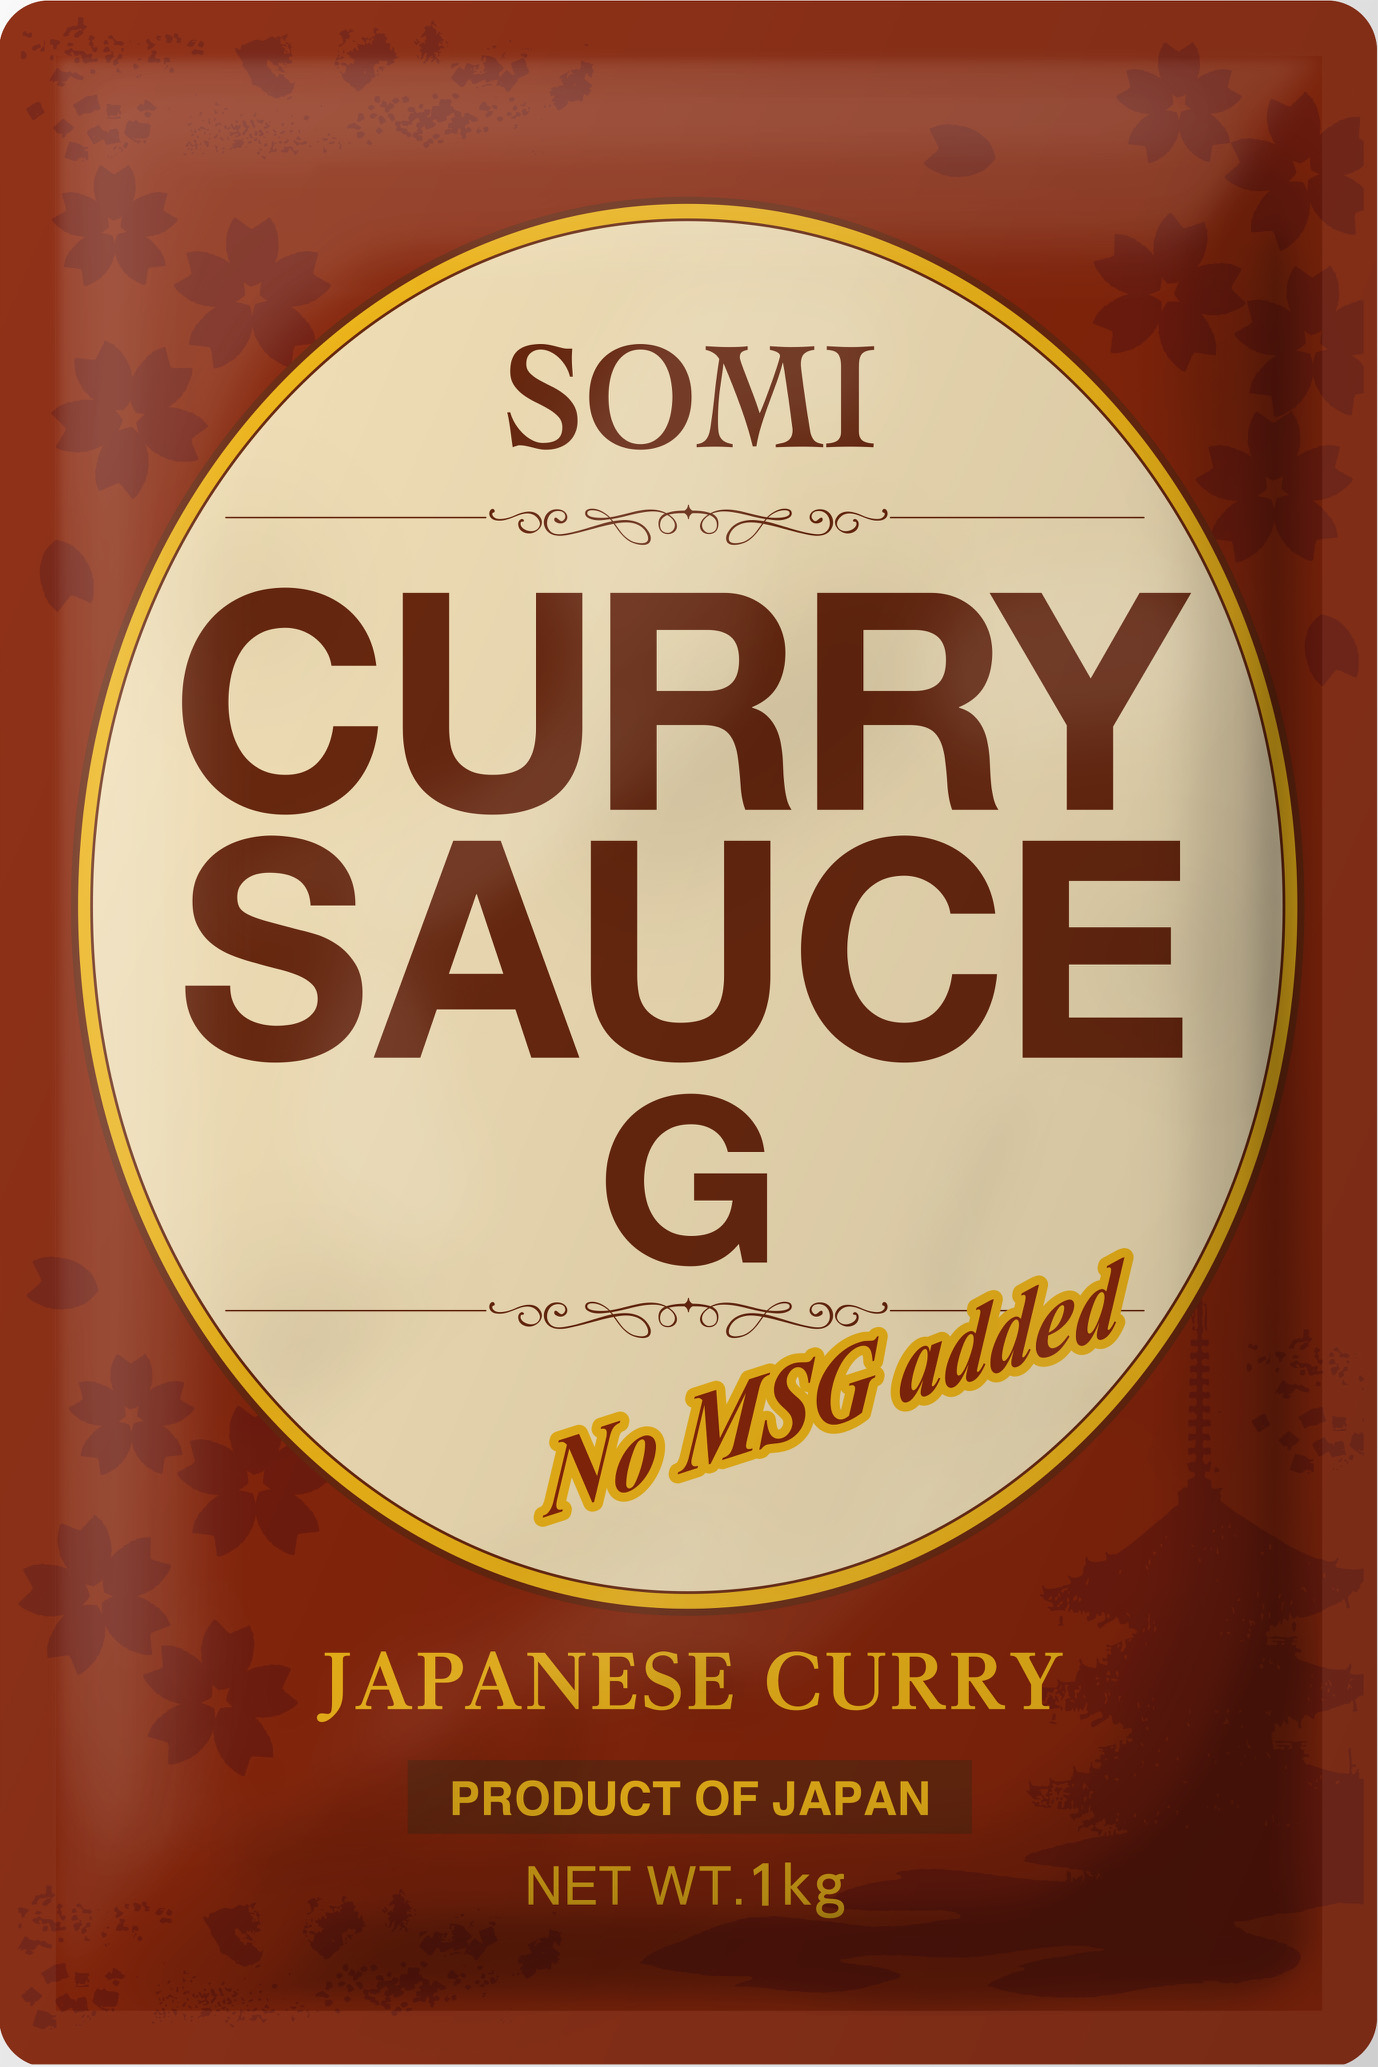 New Curry Sauce Coming soon!